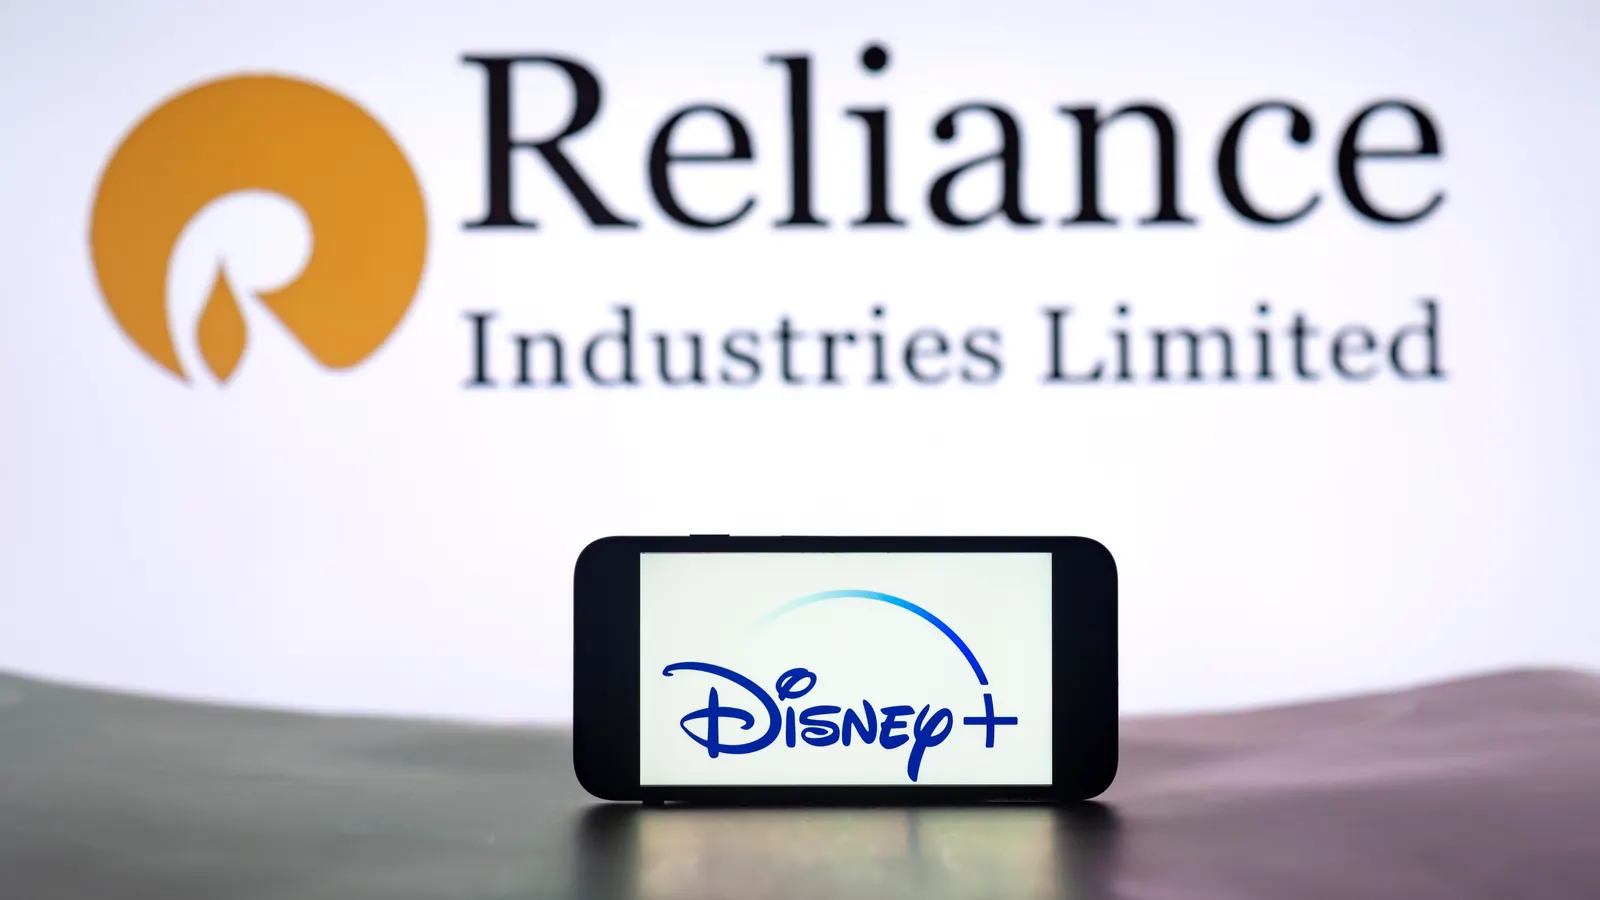 Reliance-Disney India Merger To Dominate Streaming And TV Audience In India